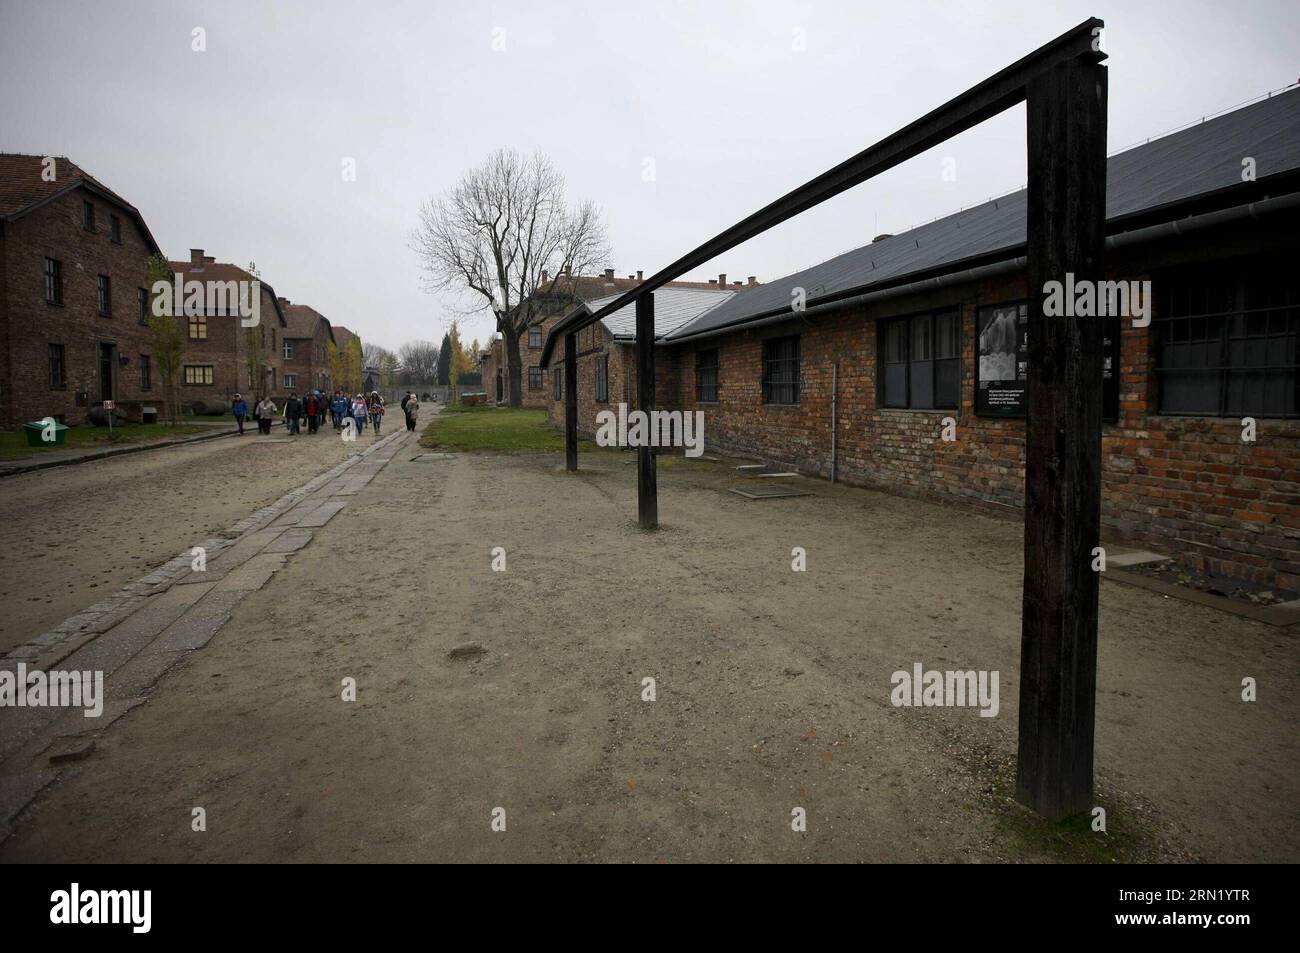 (150127) -- BRUSSELS, Jan. 27, 2015 -- Photo taken on Nov. 9, 2012 shows the gallows once used during the biggest public execution of prisoners on July 19, 1943 at the former Auschwitz concentration camp in Oswiecim, Poland. The celebrations of the 70th anniversary of Auschwitz concentration camp liberation began in the Polish southern town of Oswiecim on Tuesday morning. The concentration camp was founded in 1940 by the Germans mostly for the aim of imprisoning Polish captives. Since 1942 it became Europe s one of the biggest places of Jewish extermination, with more than 1.1 million people k Stock Photo